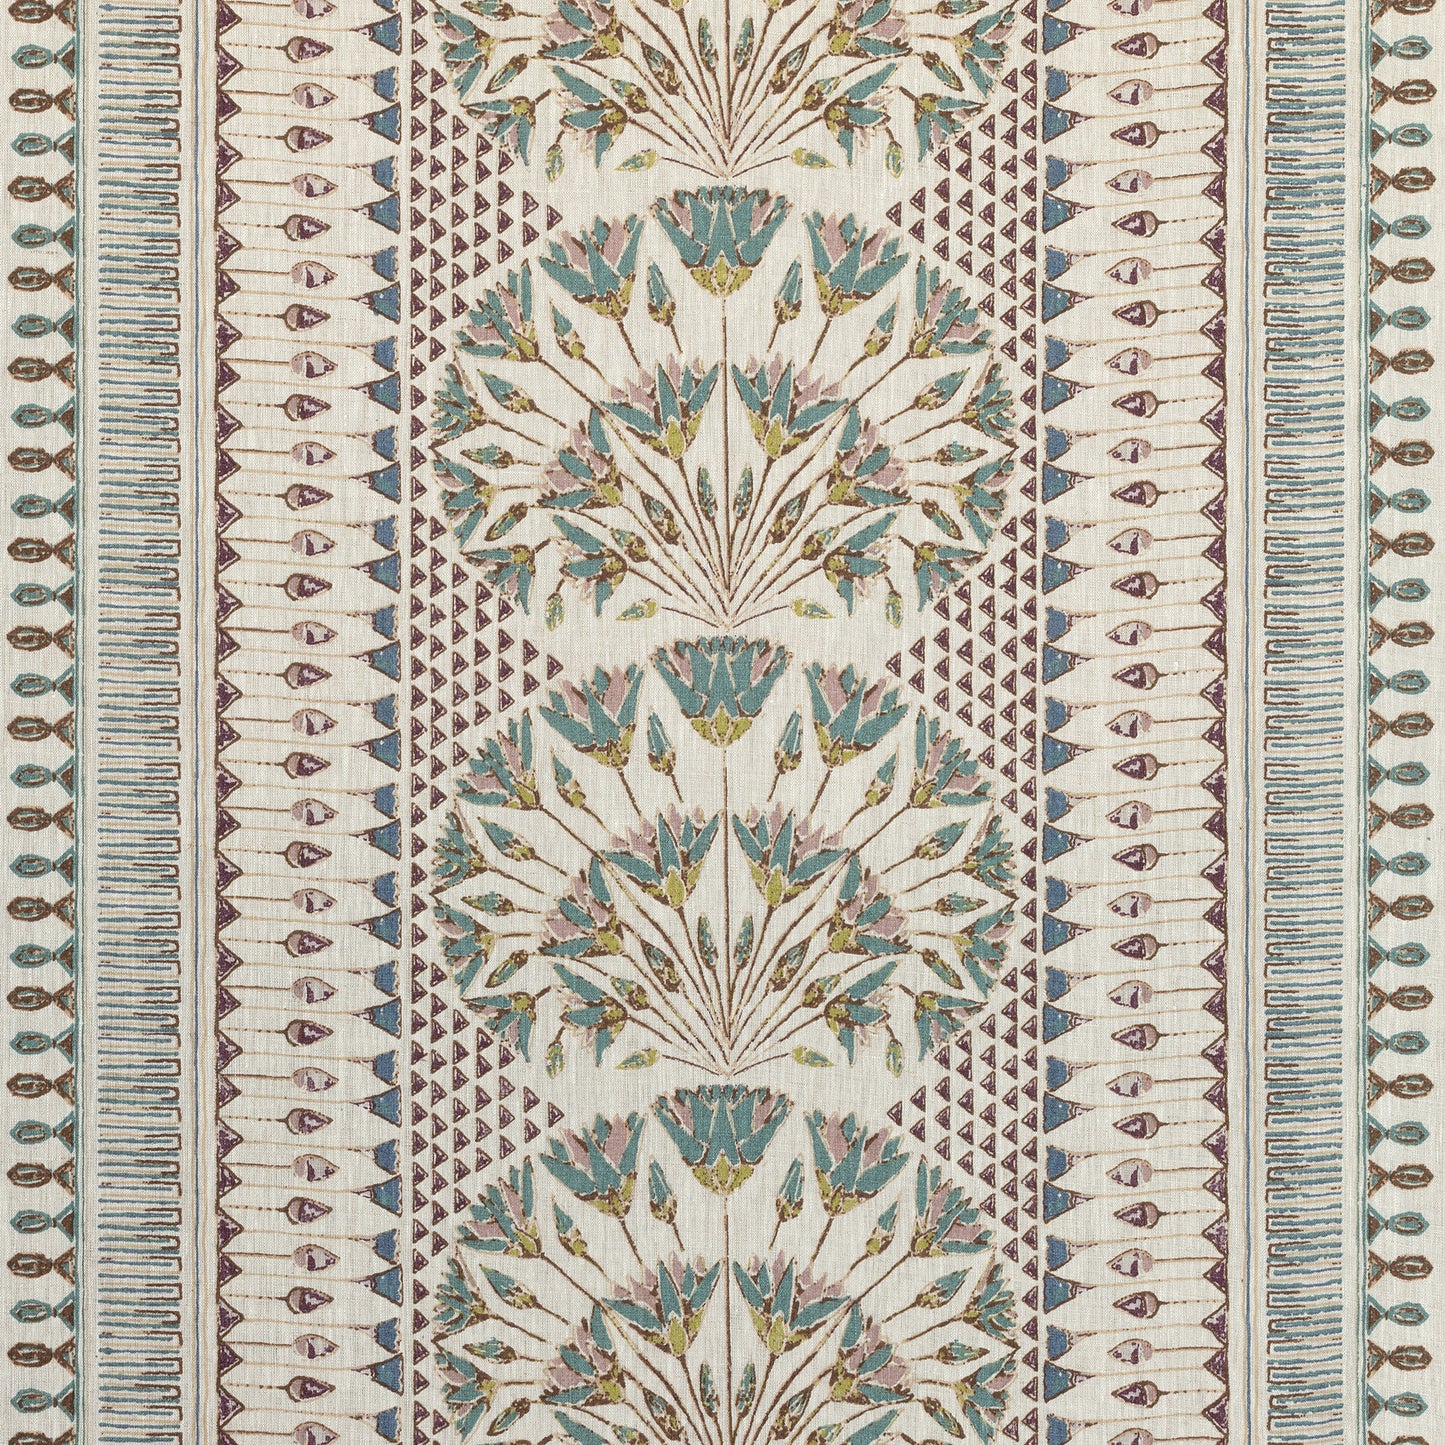 Purchase  Ann French Fabric Pattern# AF9626  pattern name  Cairo